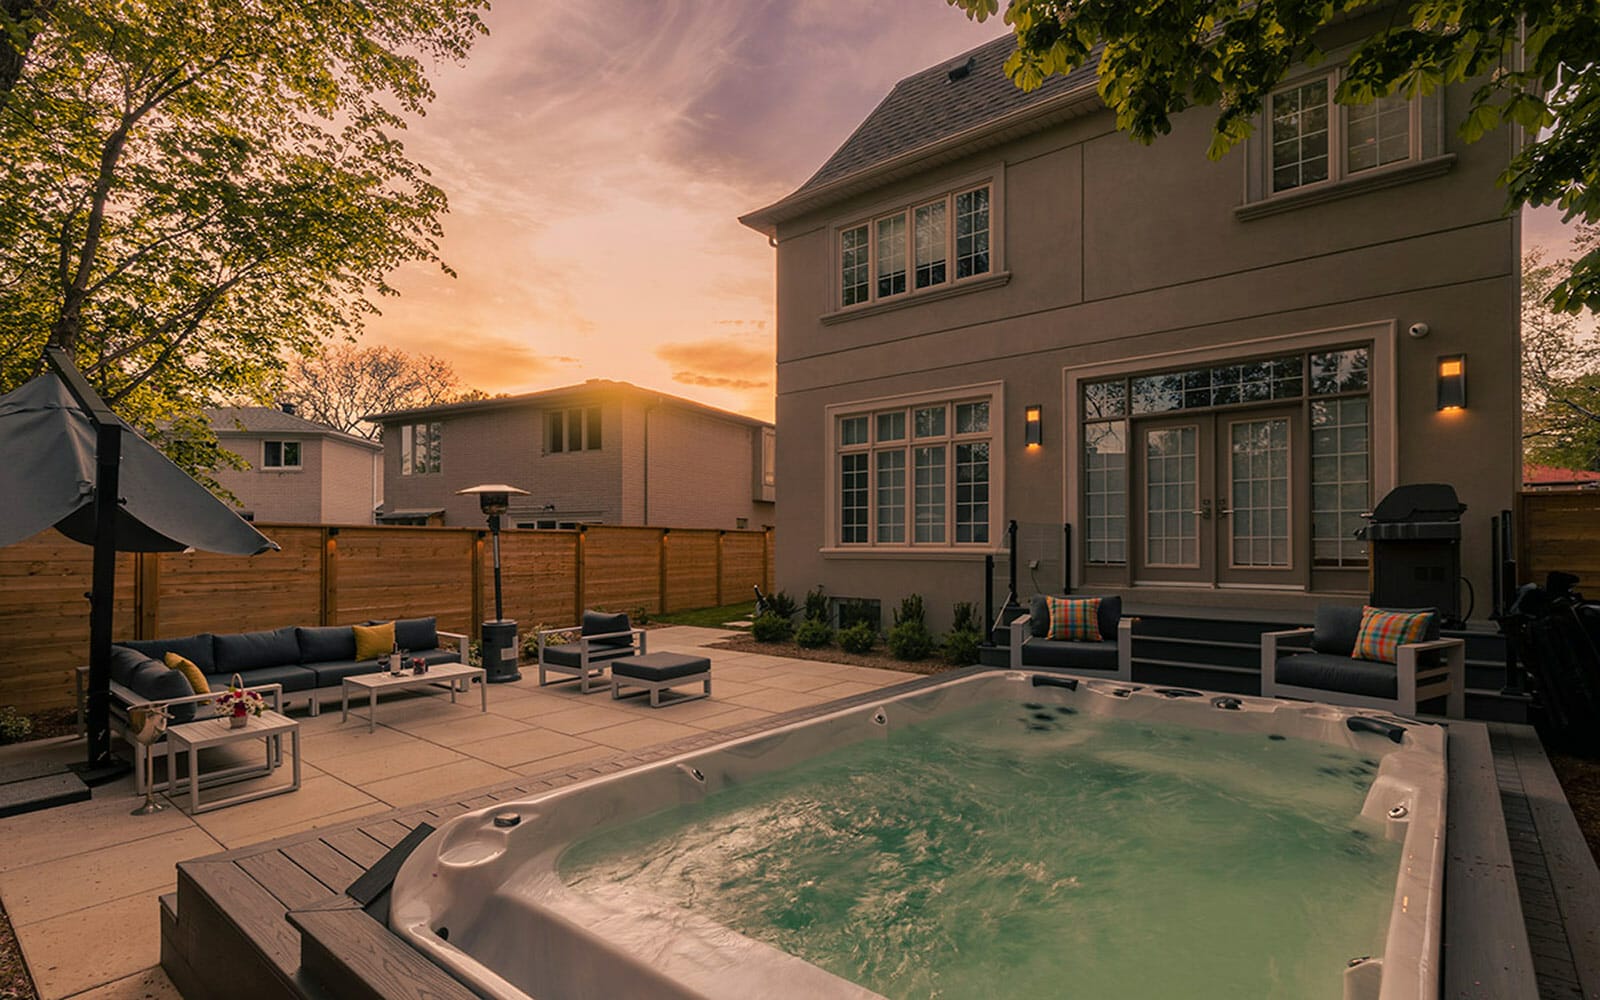 Premium Toronto Landscaping Project; Featuring Swim Spa Installation, PVC Deck with Glass Railings and Outdoor Lighting Features, Patio Stone Interlocking, and Privacy Fence Build by M.E. Contracting.